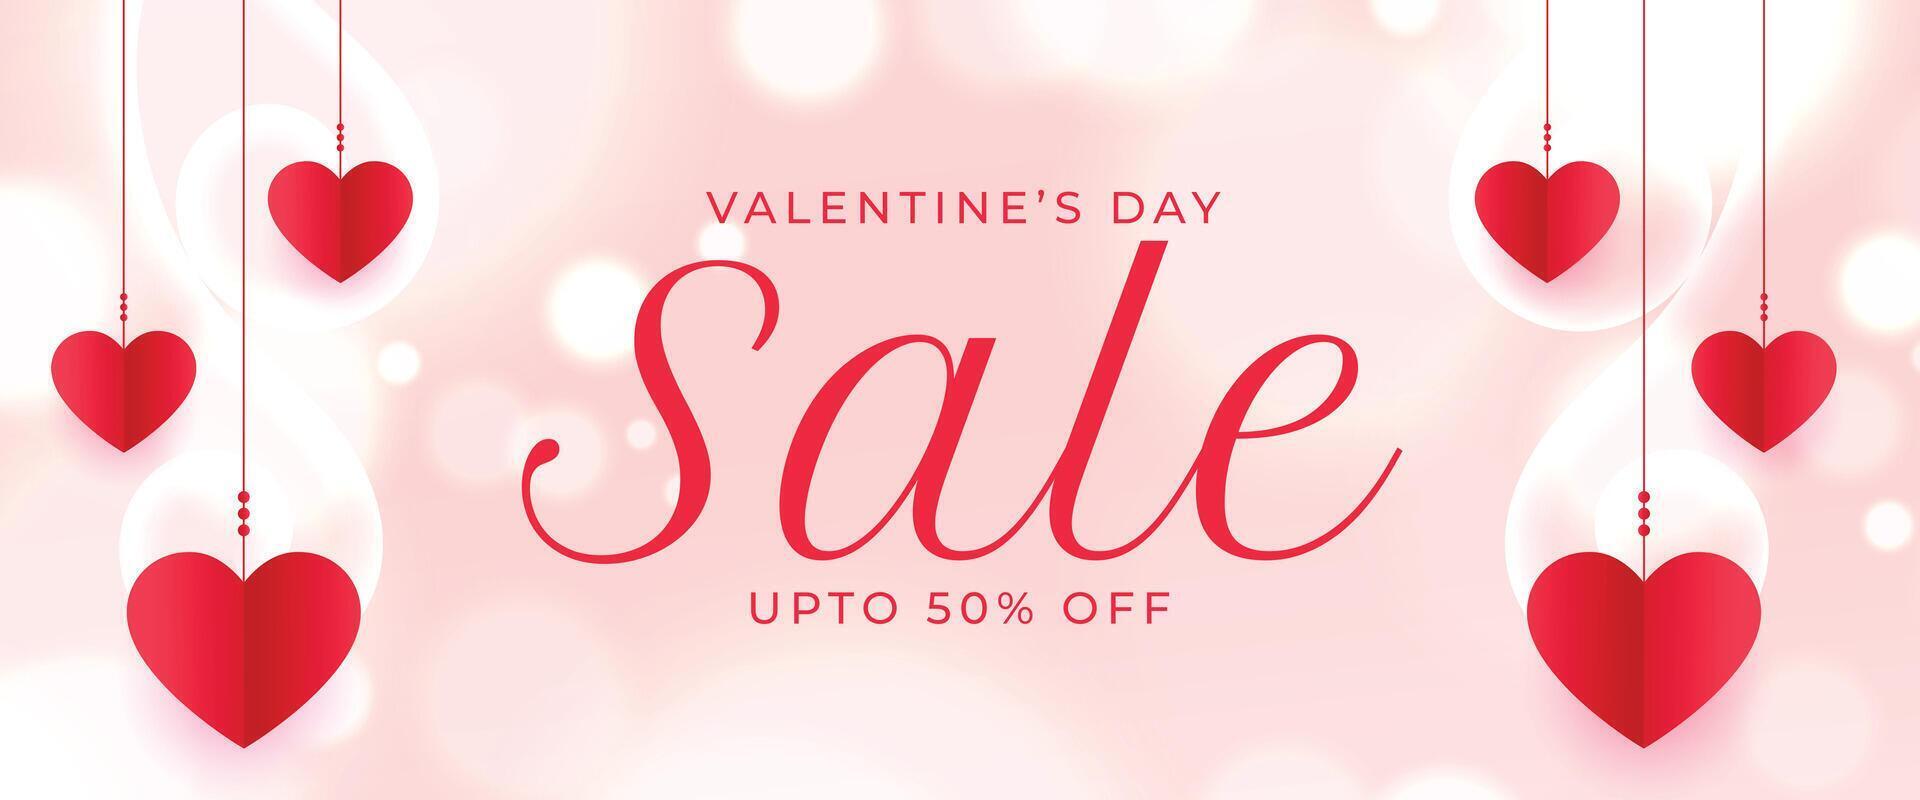 valentines day sale and discount banner with paper hearts vector